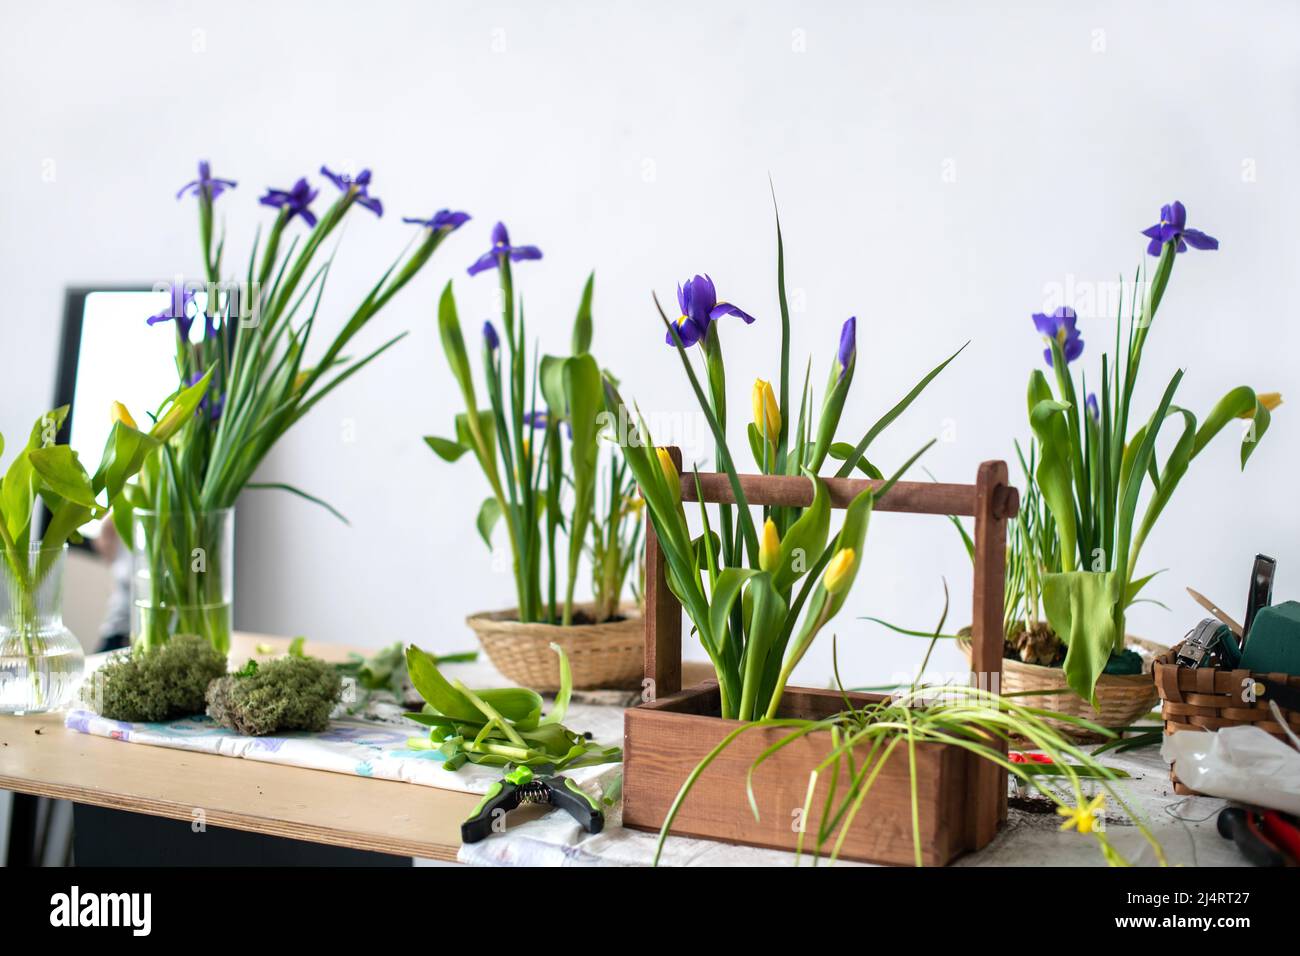 Elegant spring, Easter flower arrangements of irises, tulips, daffodils and willow branches, located on a table located against a white wall in Stock Photo